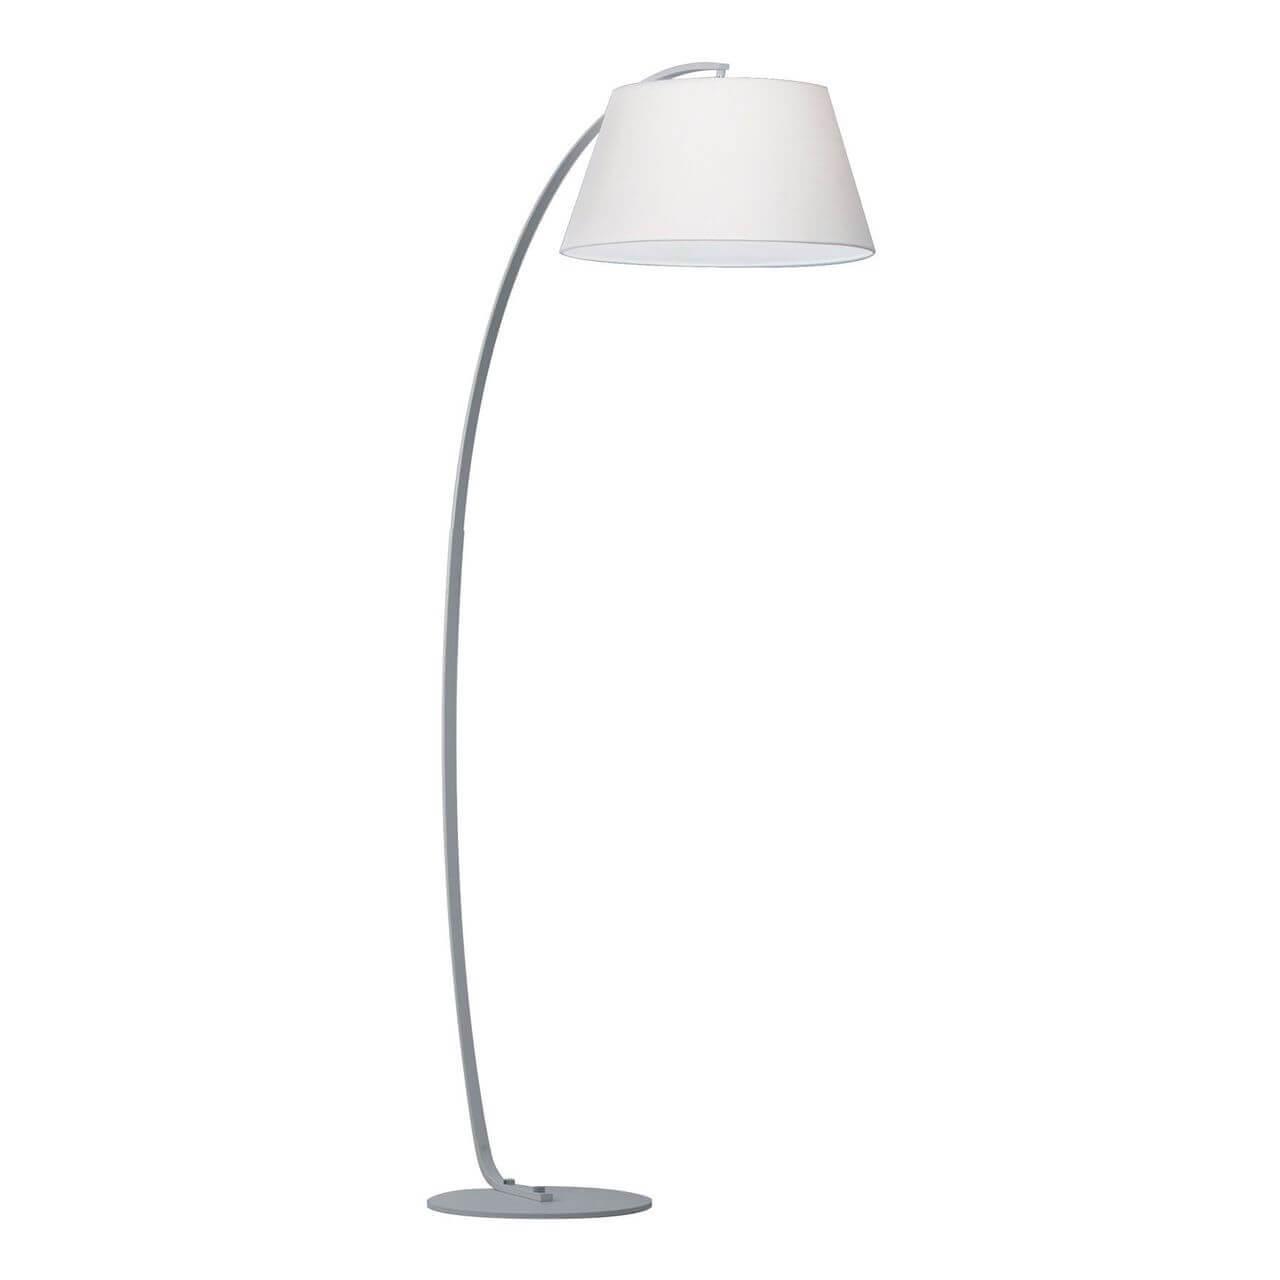  Ideal Lux Pagoda PT1 Bianco 051741